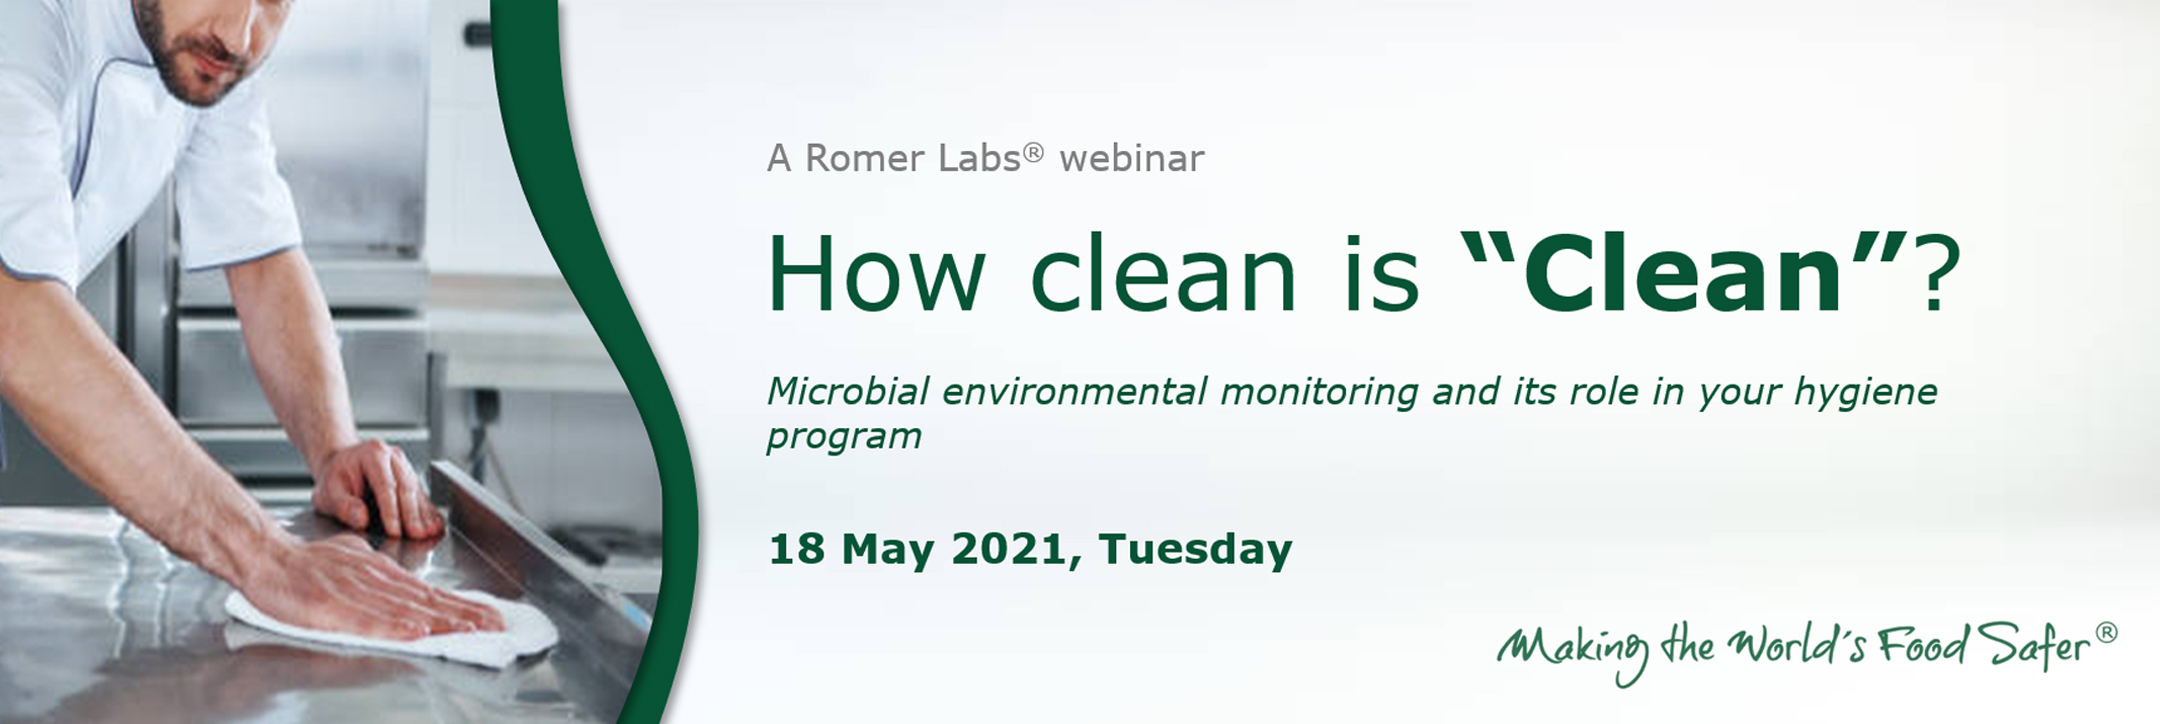 Basics of Hygiene in Food Production with an overview of Microbial Environmental Monitoring